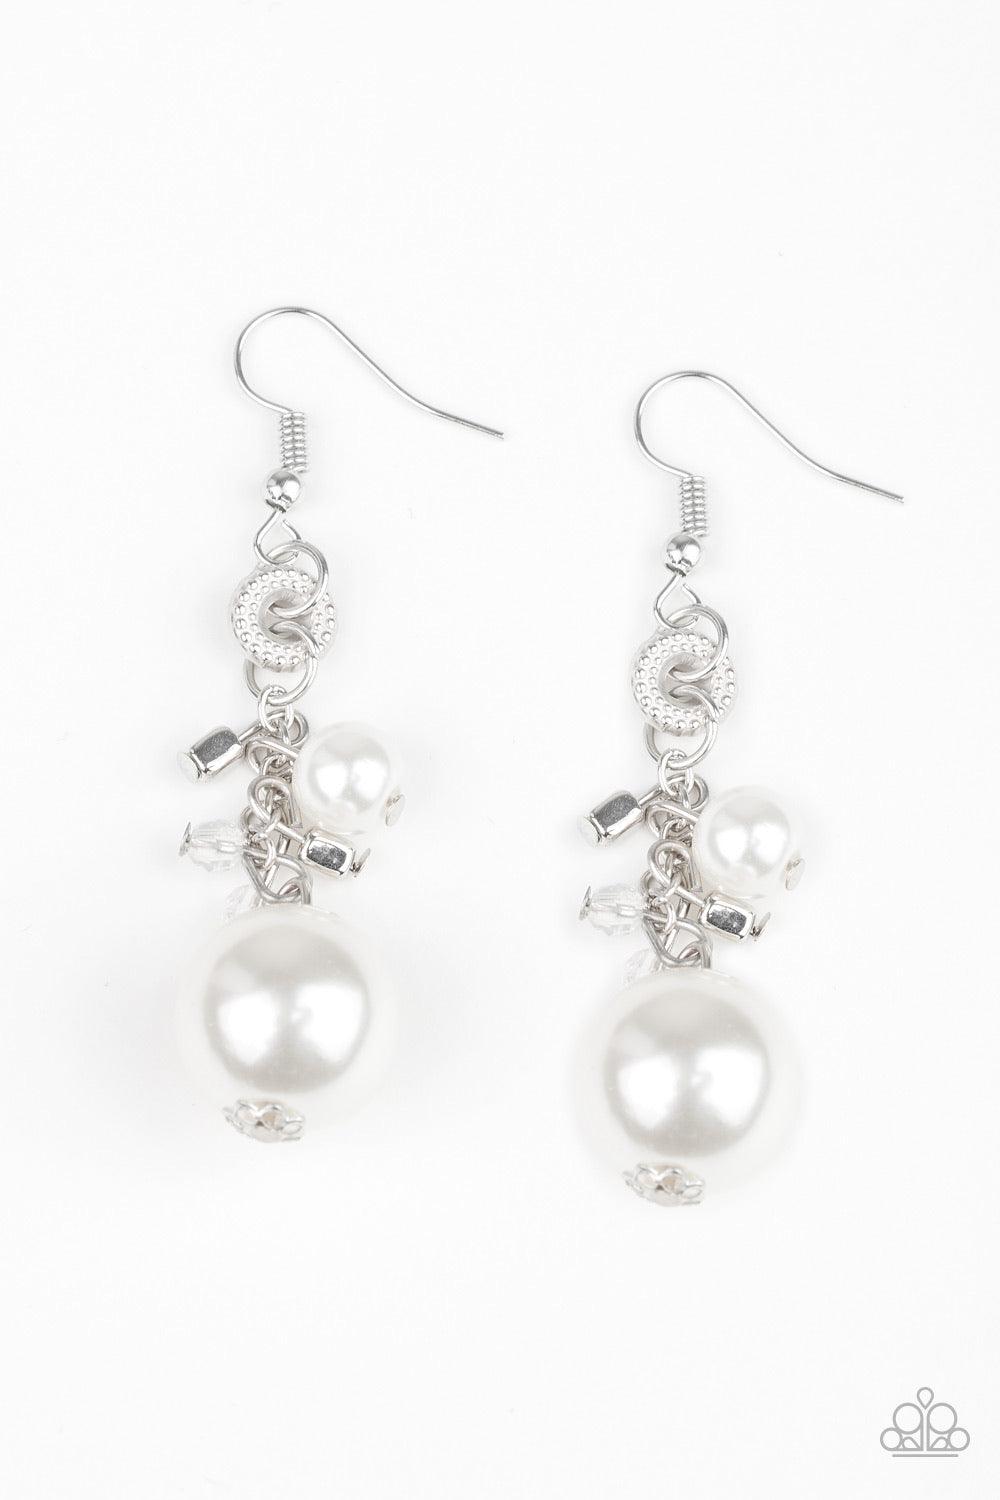 Paparazzi Accessories Timelessly Traditional - White A bubbly white pearl, glassy crystal-like beads, and shimmery silver cube beads trickle along a glistening silver chain. An oversized white pearl swings from the bottom of the chain, creating a dramatic